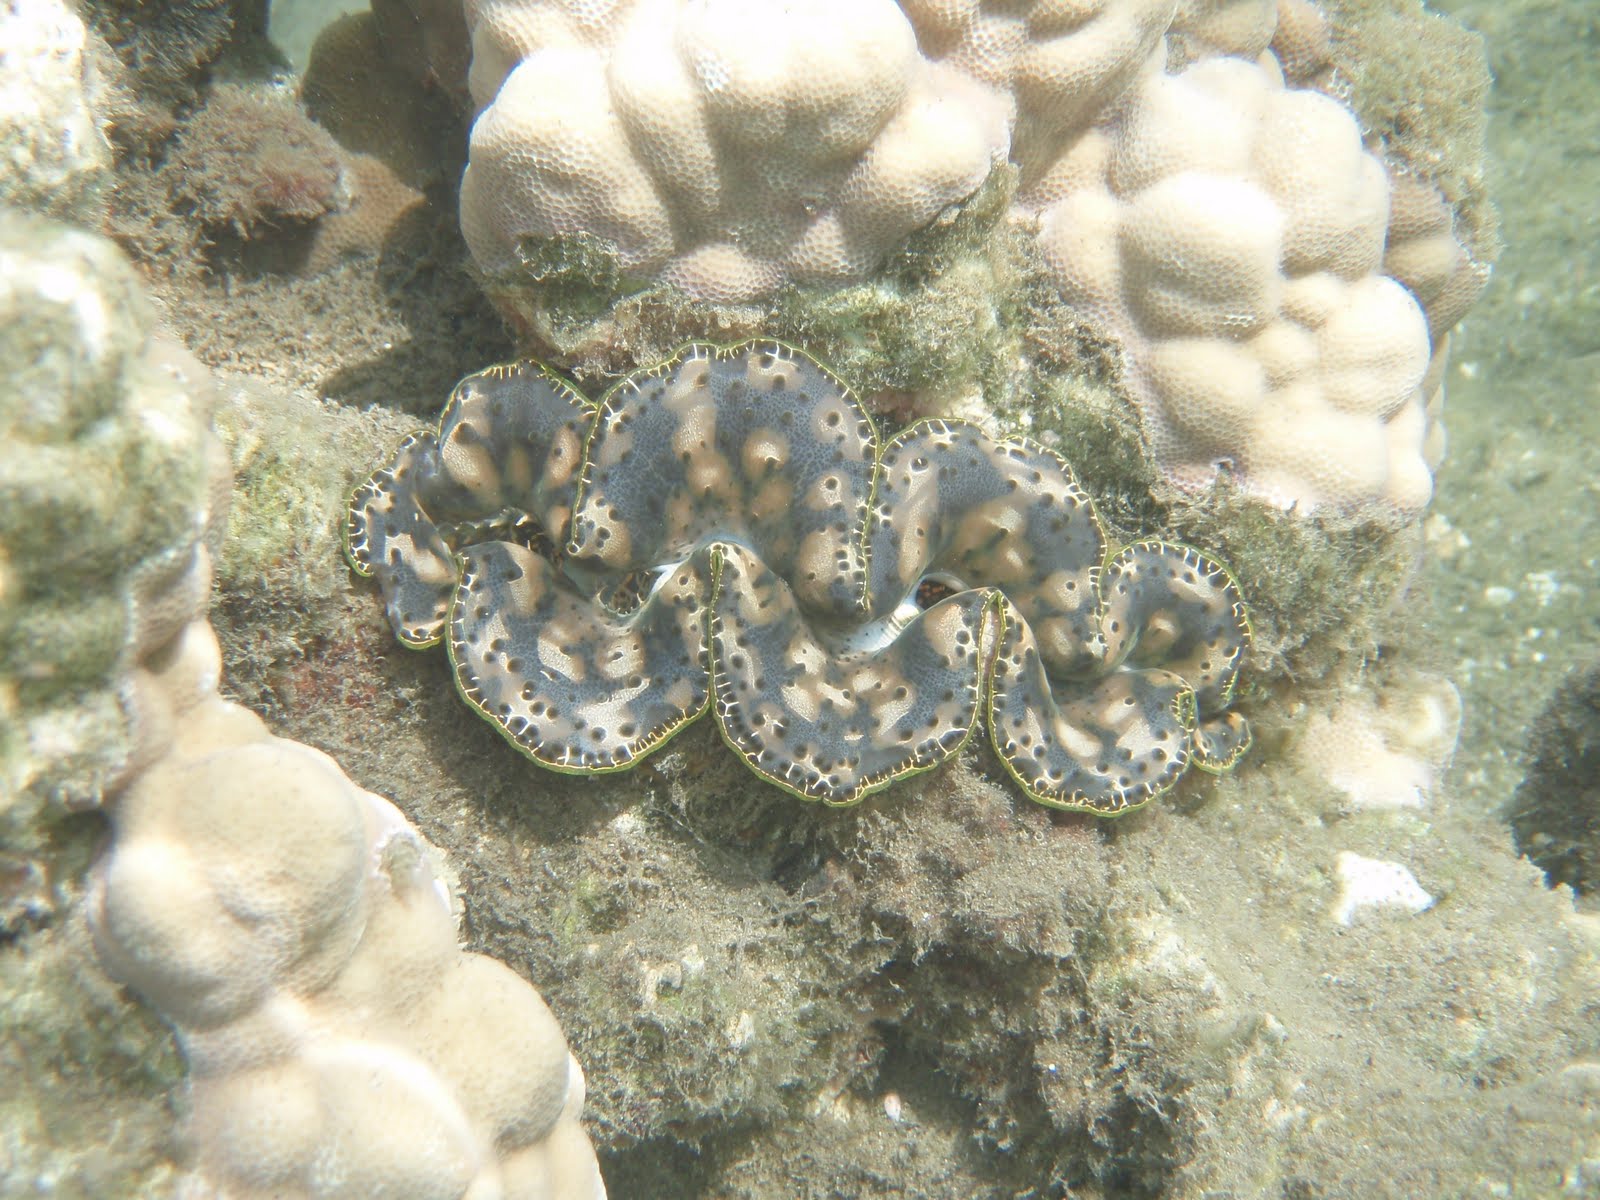 Grey/cream mottled small giant clam